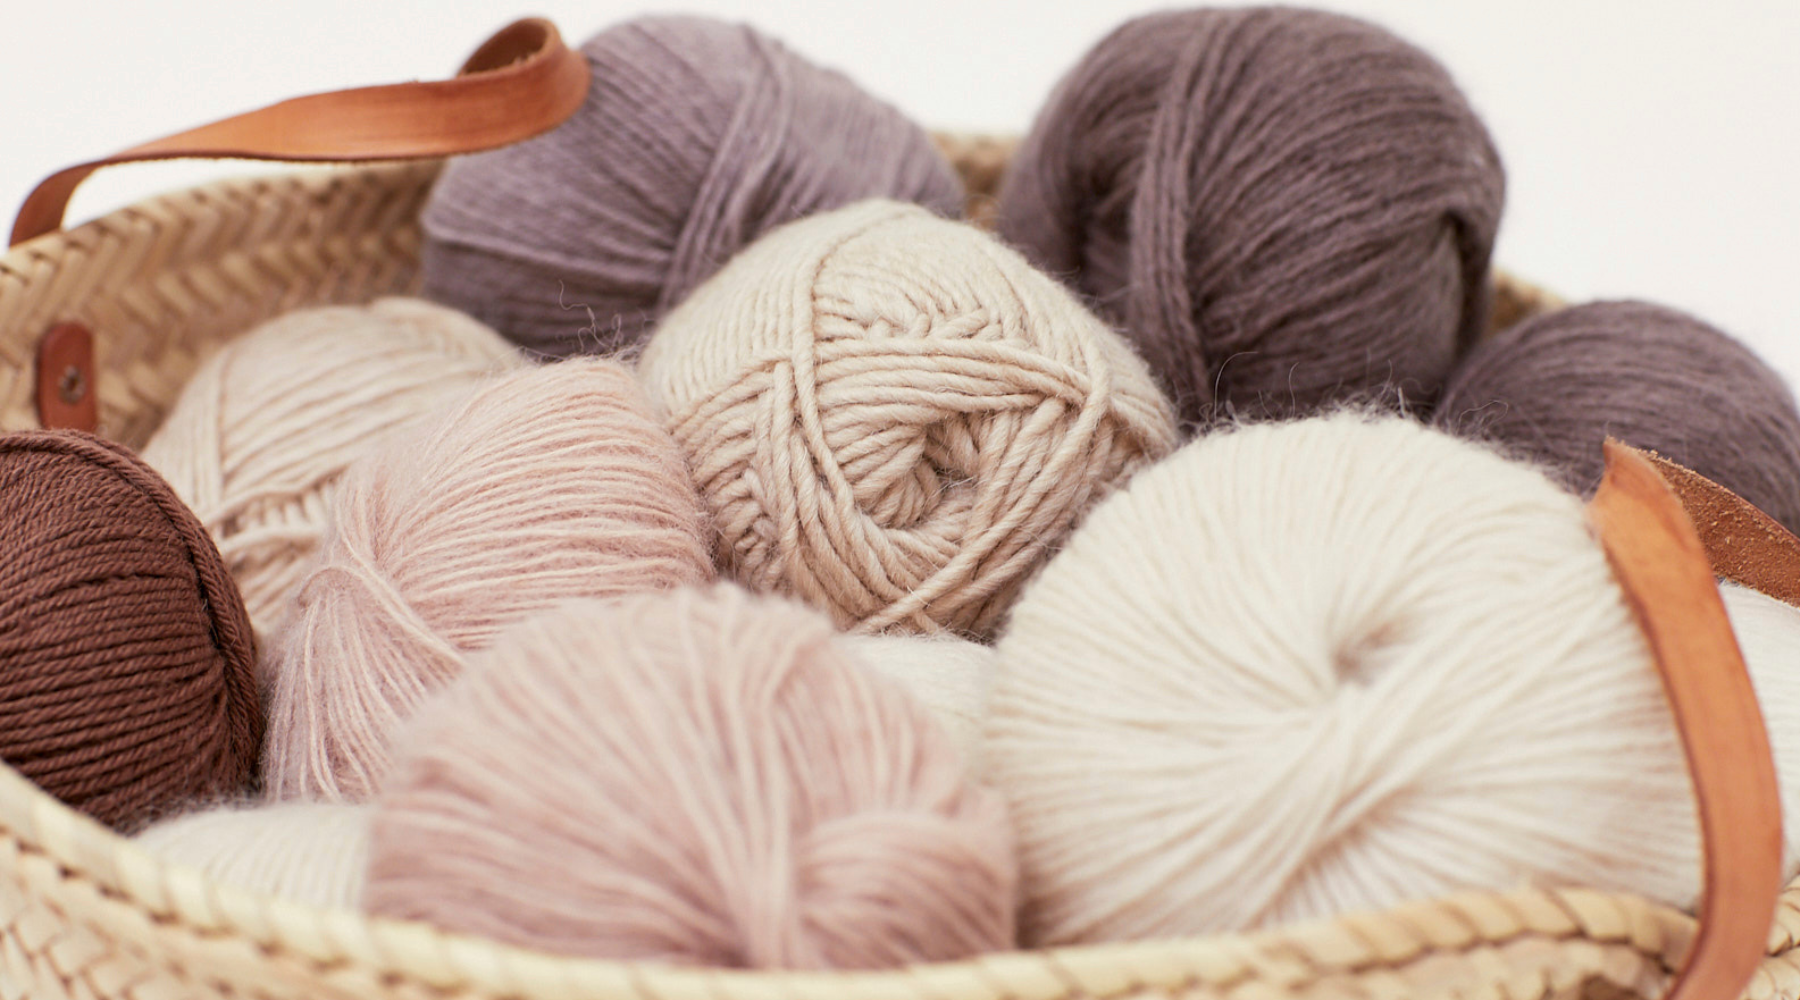 Yarn Construction - what are plied, chainette, tube, and blown yarns?